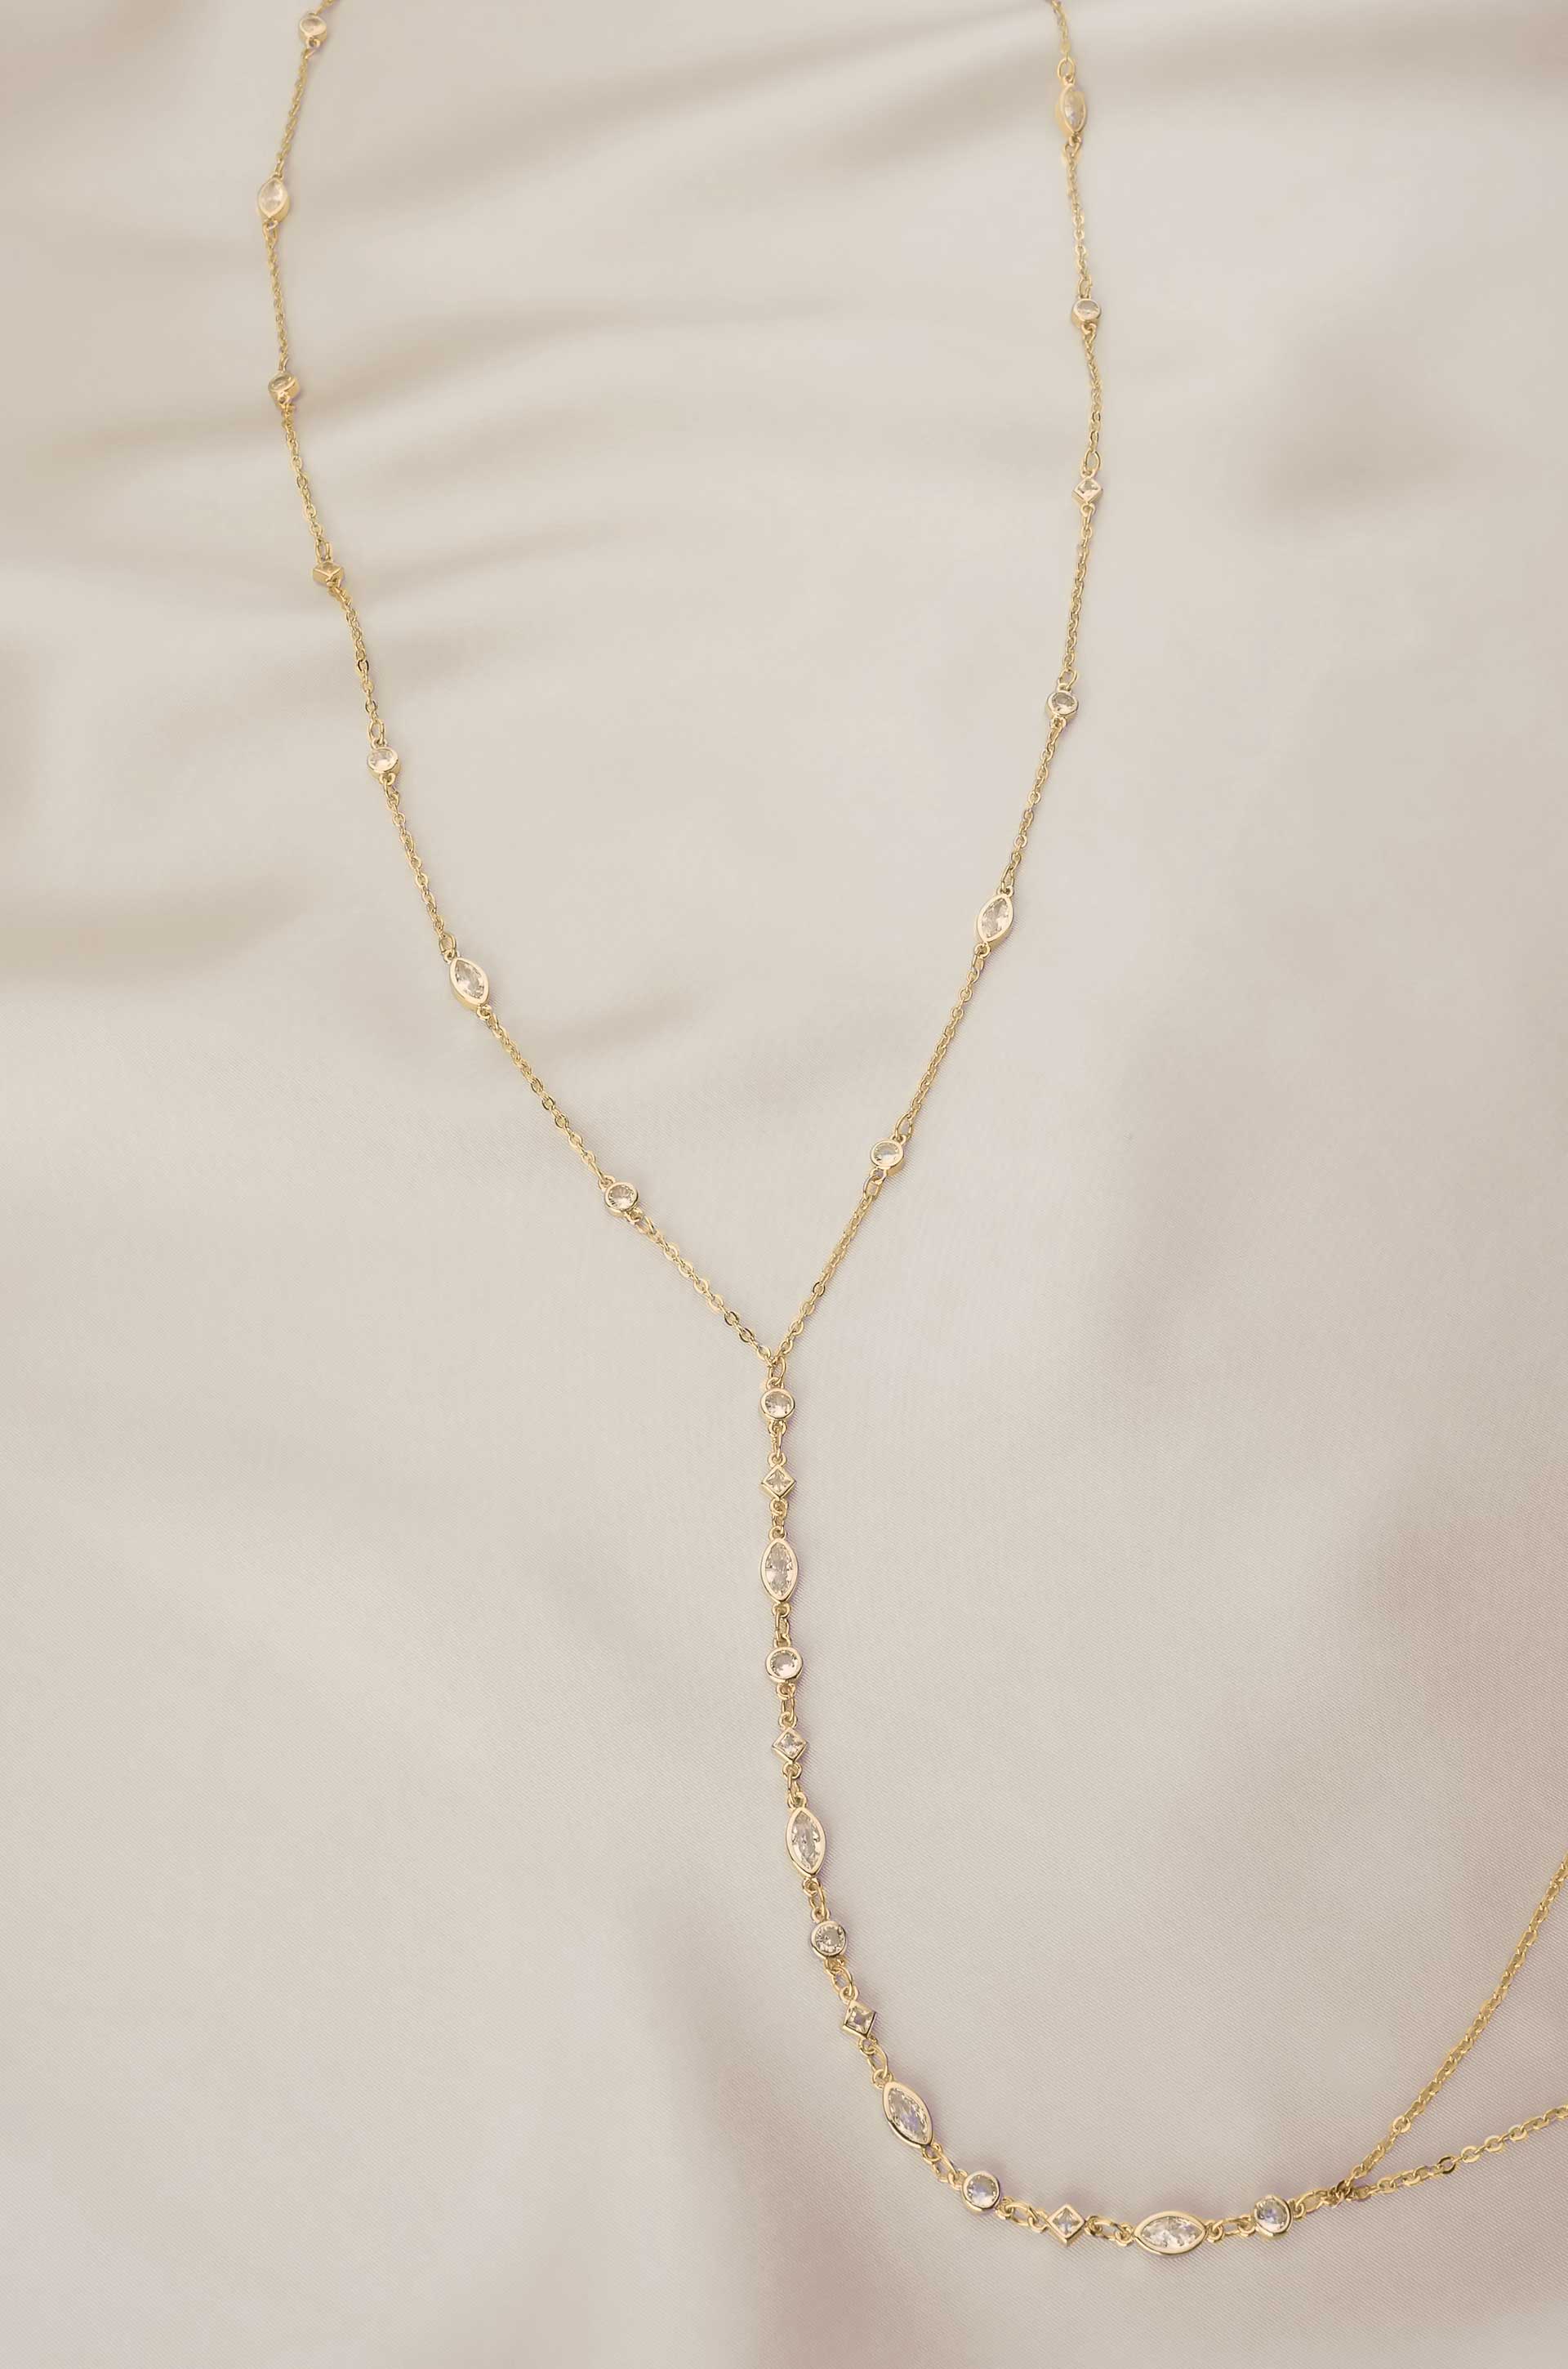 Blissful Crystal Body Chain in Gold on satin